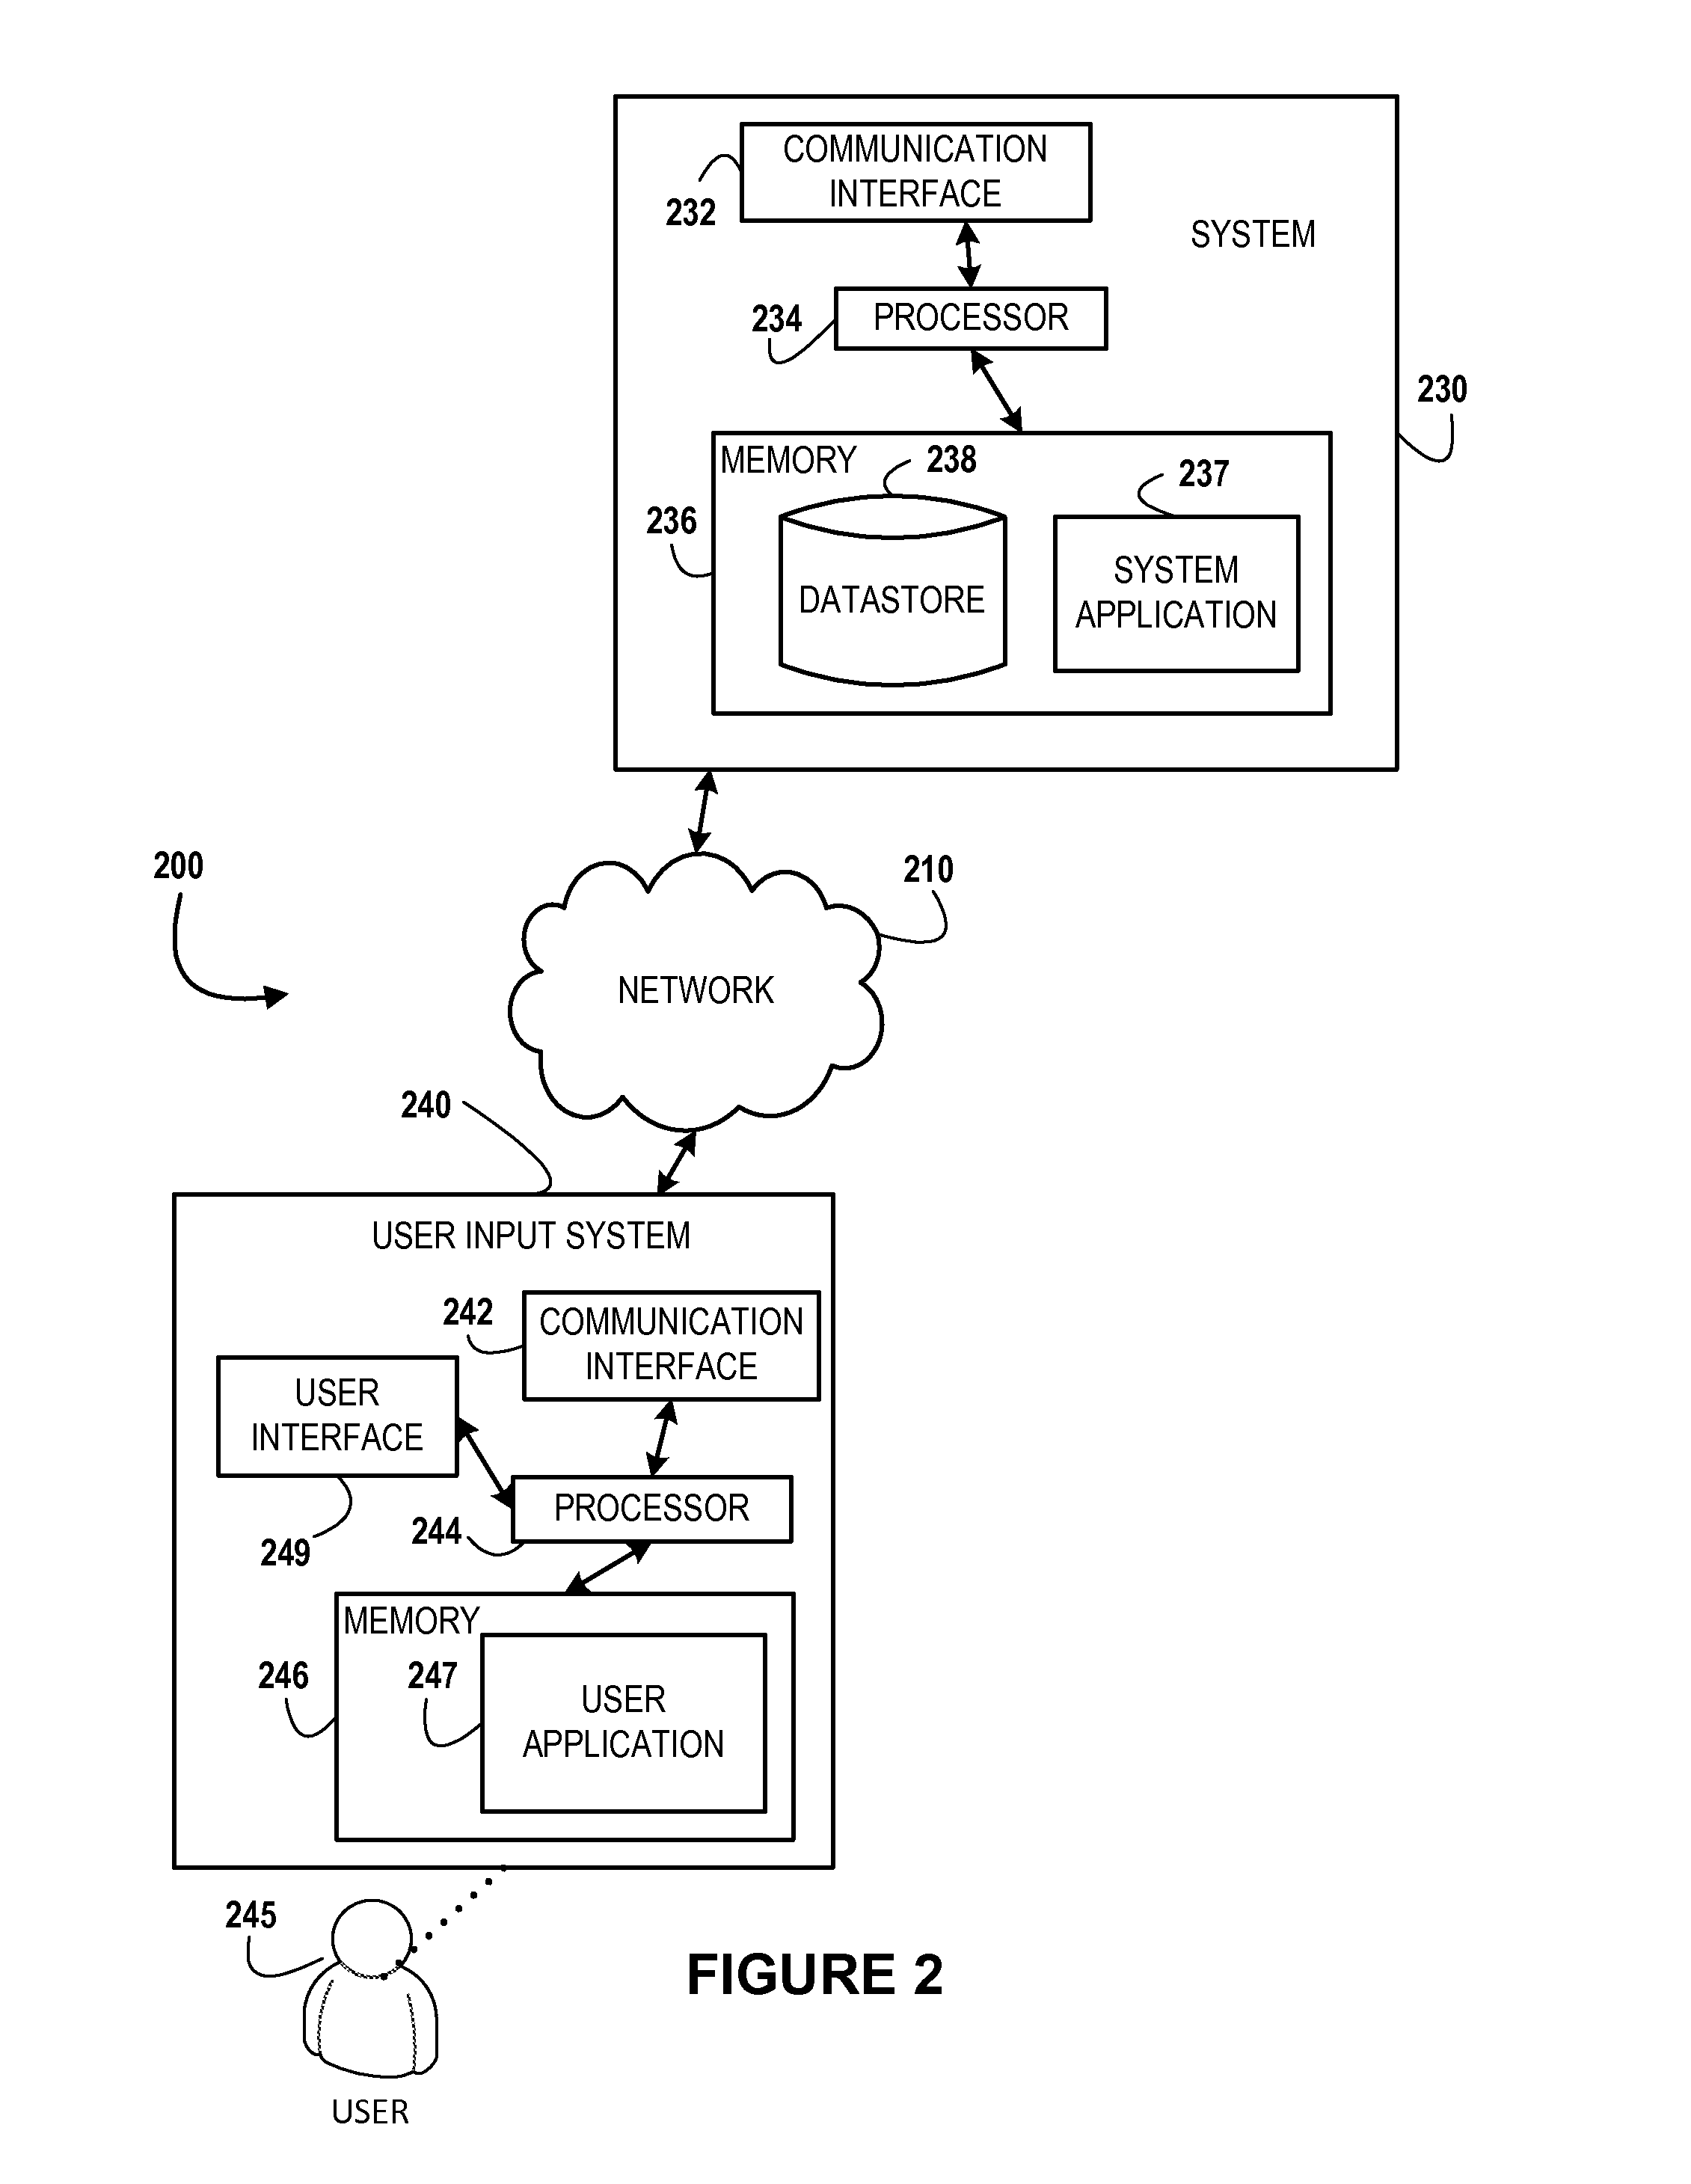 Pre-set readable indicia to facilitate payment during a transaction with a merchant when there is limited network connectivity